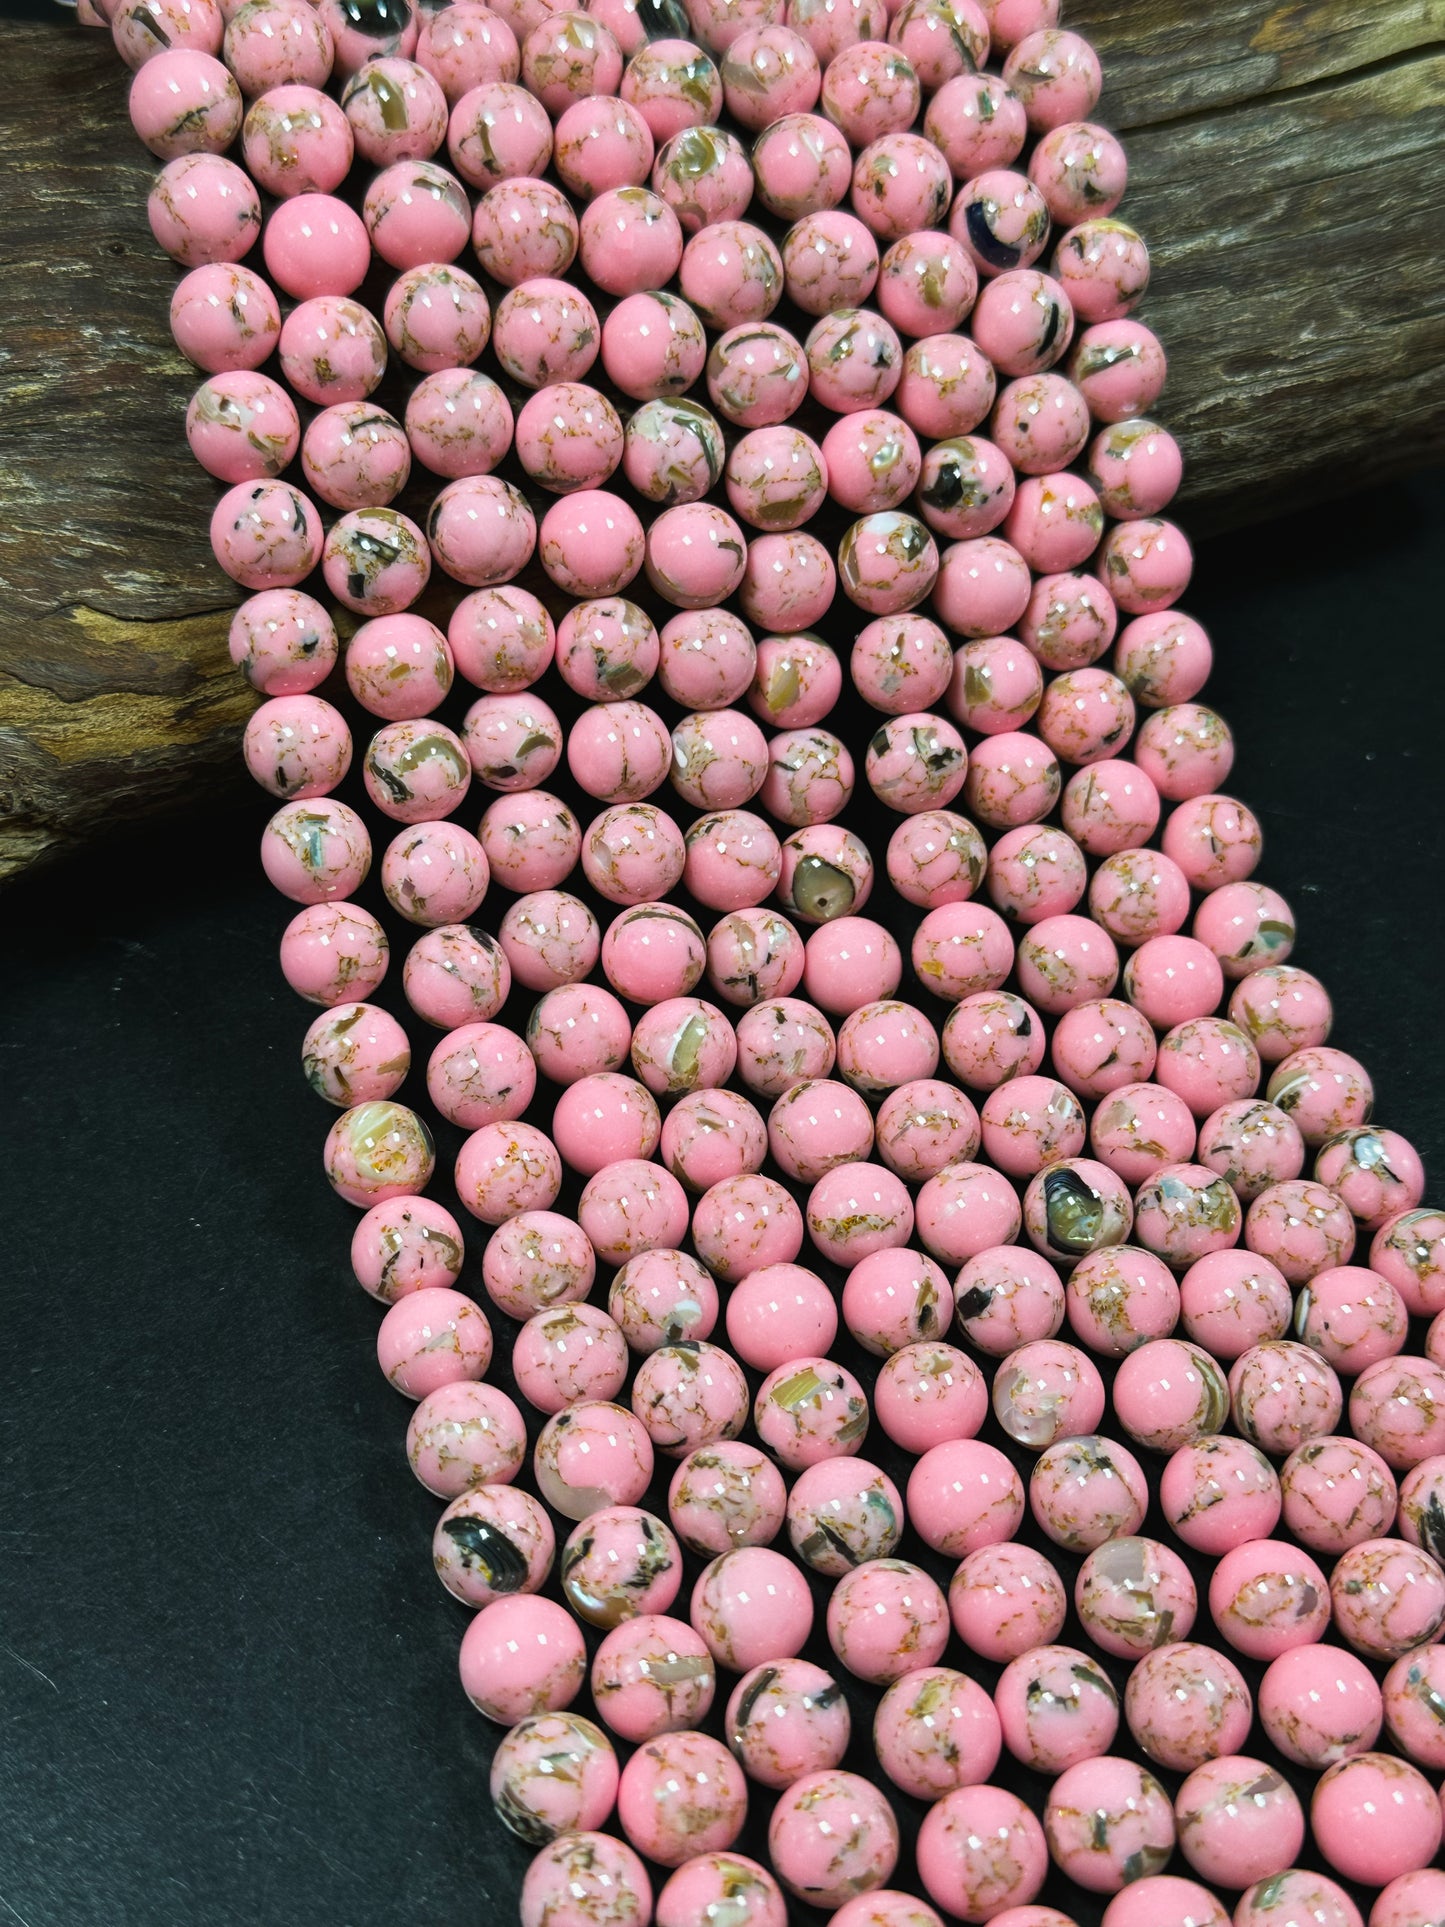 Beautiful Howlite Abalone Shell Bead 6mm 8mm 10mm Round Bead, Gorgeous Pink Color Howlite Natural Abalone Shell Bead Full Strand 15.5"